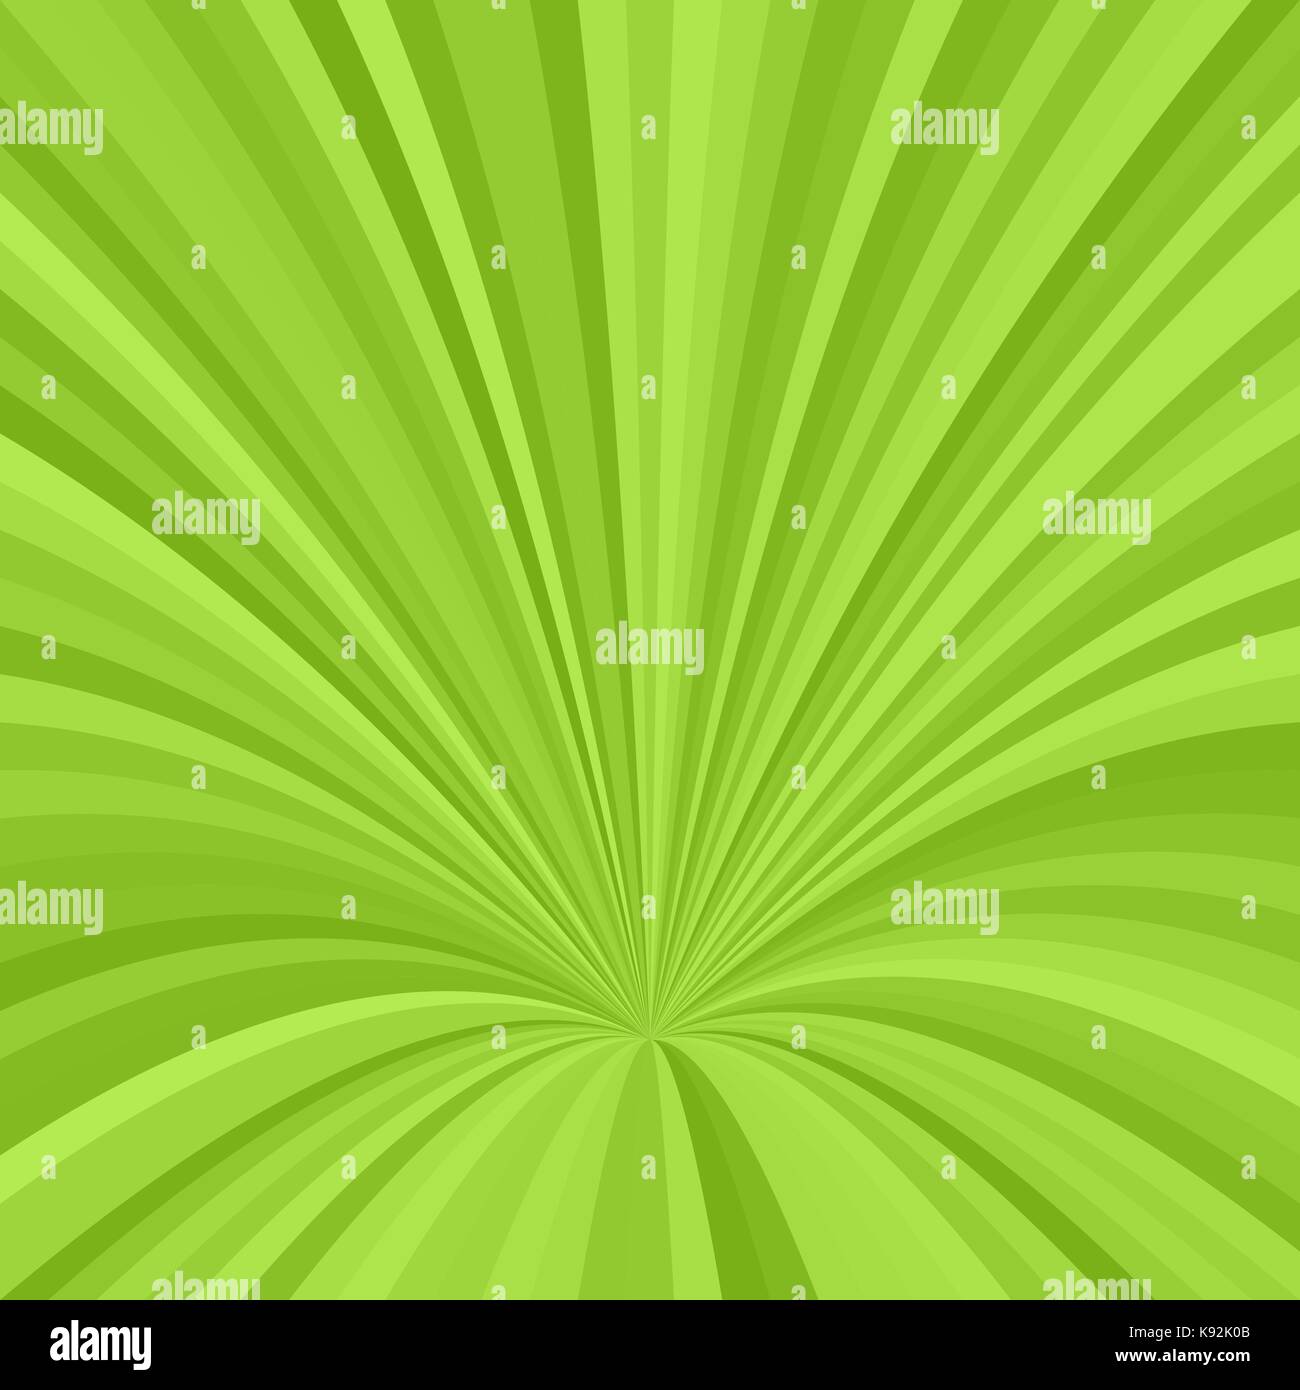 Curved ray burst background - vector graphic from curved stripes in green tones Stock Vector